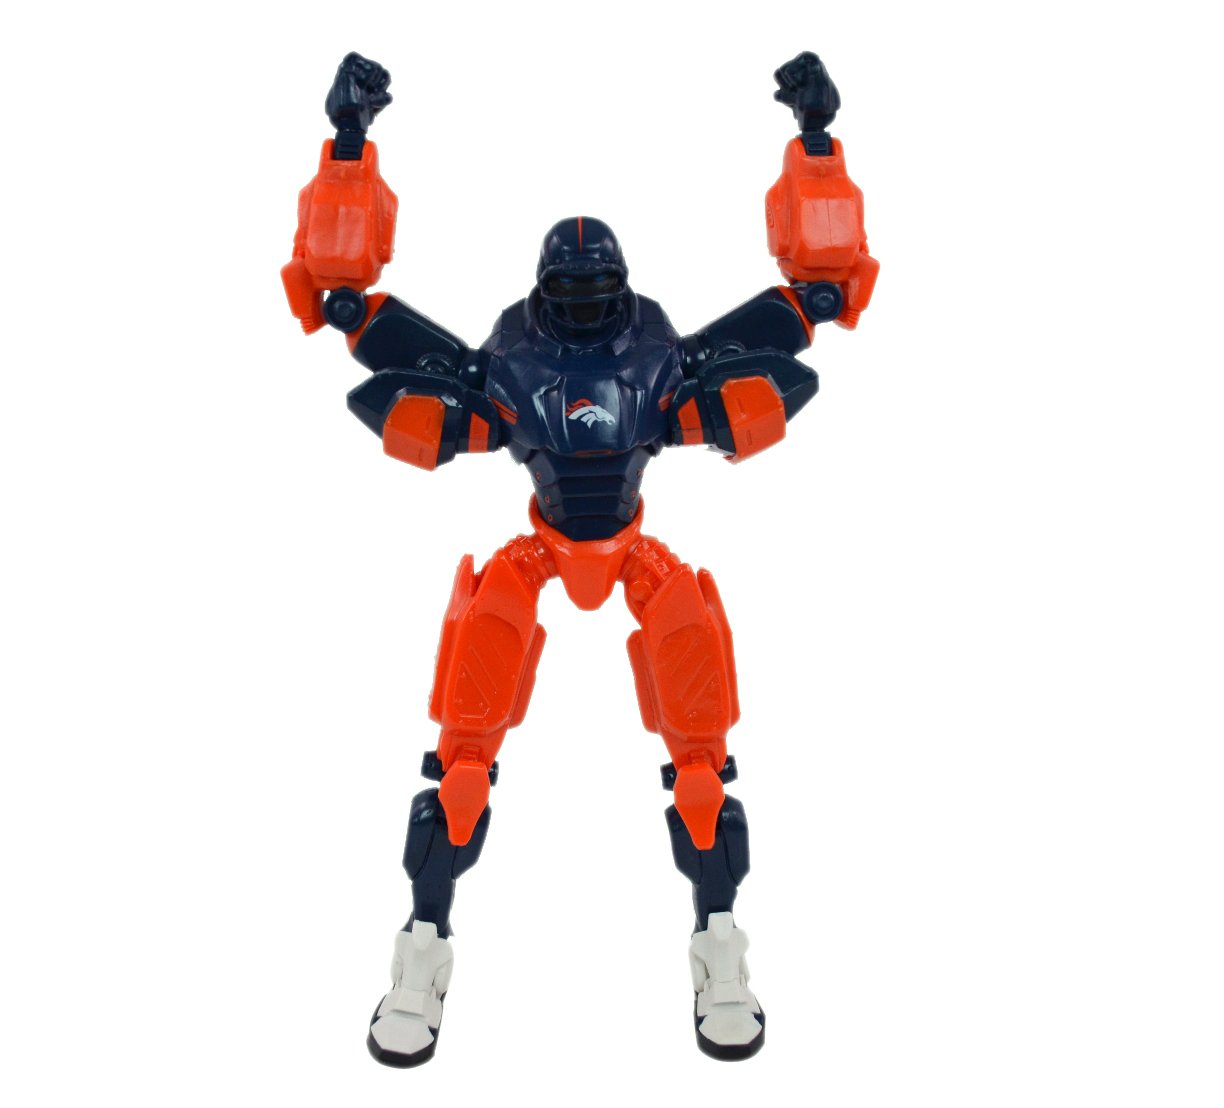 NFL Shop Authentic Fox Sports Cleatus Robot. This 10" Cleatus Football Robot will definitely be a crowd pleaser for any NFL Fan. A hit for Sports Fan from 4 to 94